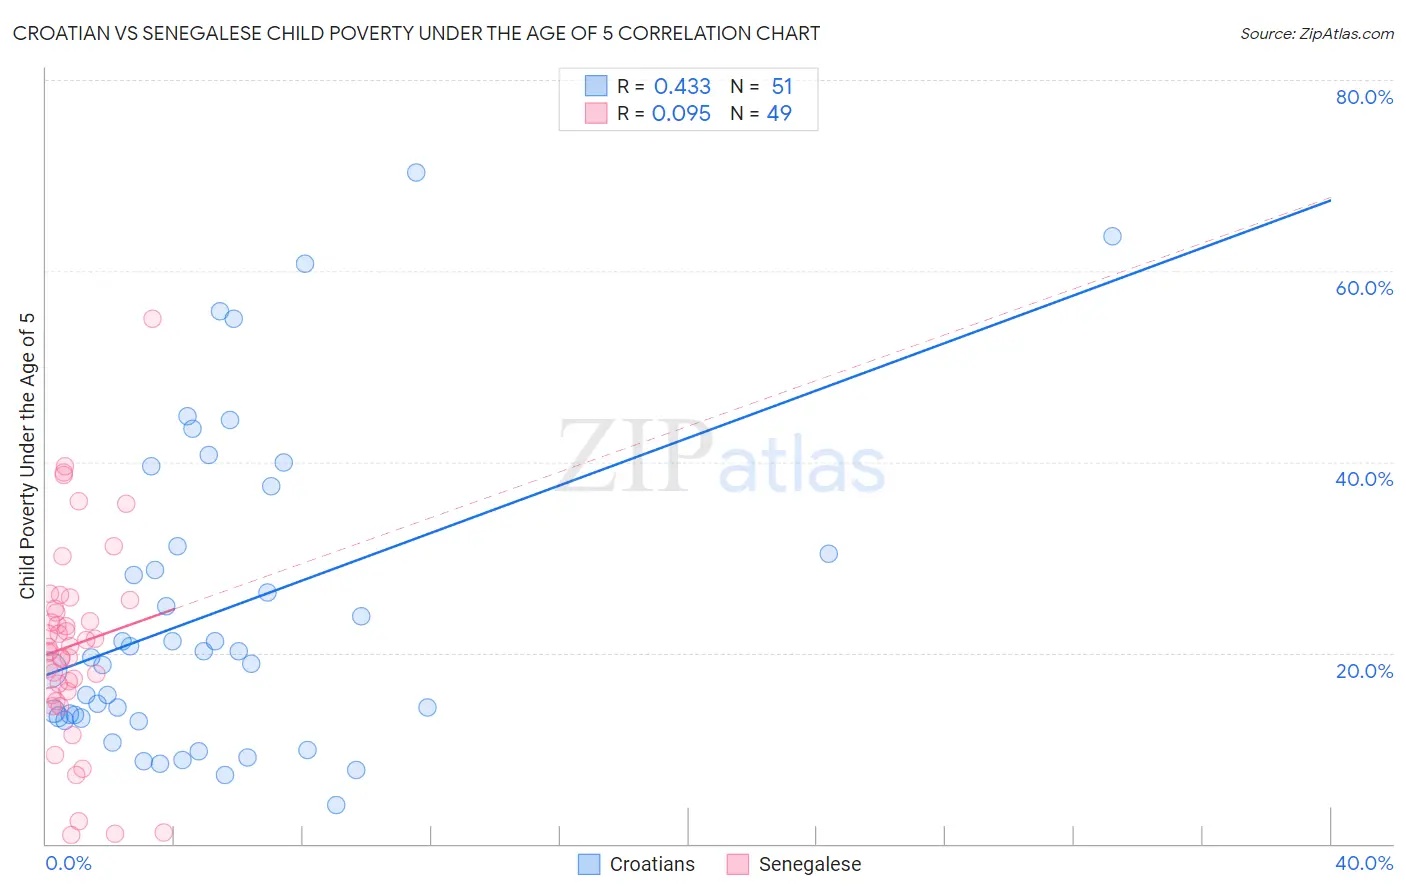 Croatian vs Senegalese Child Poverty Under the Age of 5